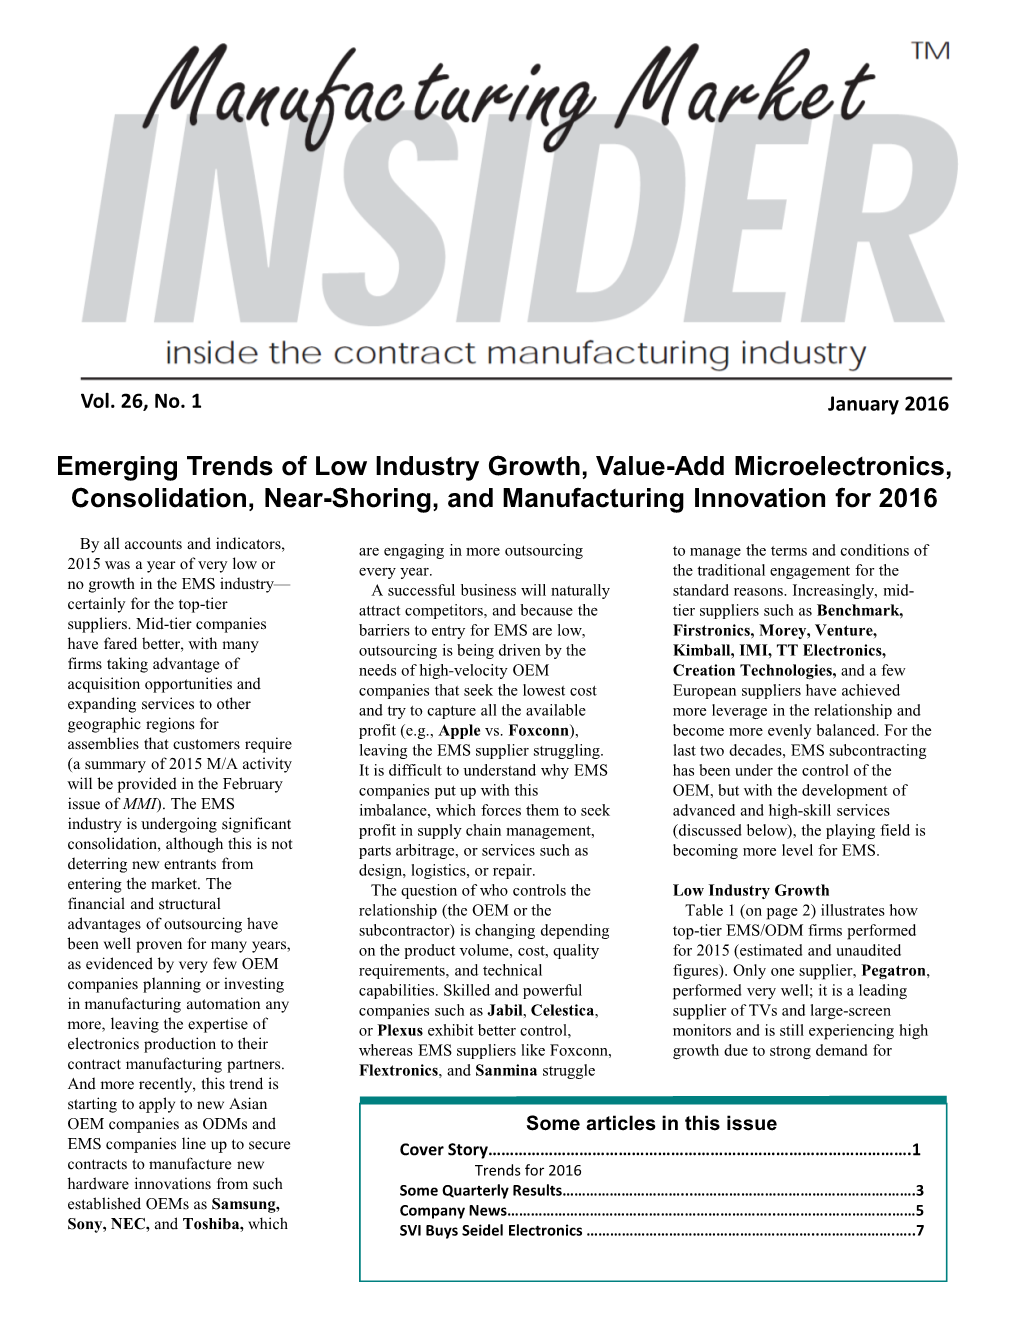 Emerging Trends of Low Industry Growth, Value-Add Microelectronics, Consolidation, Near-Shoring, and Manufacturing Innovation for 2016